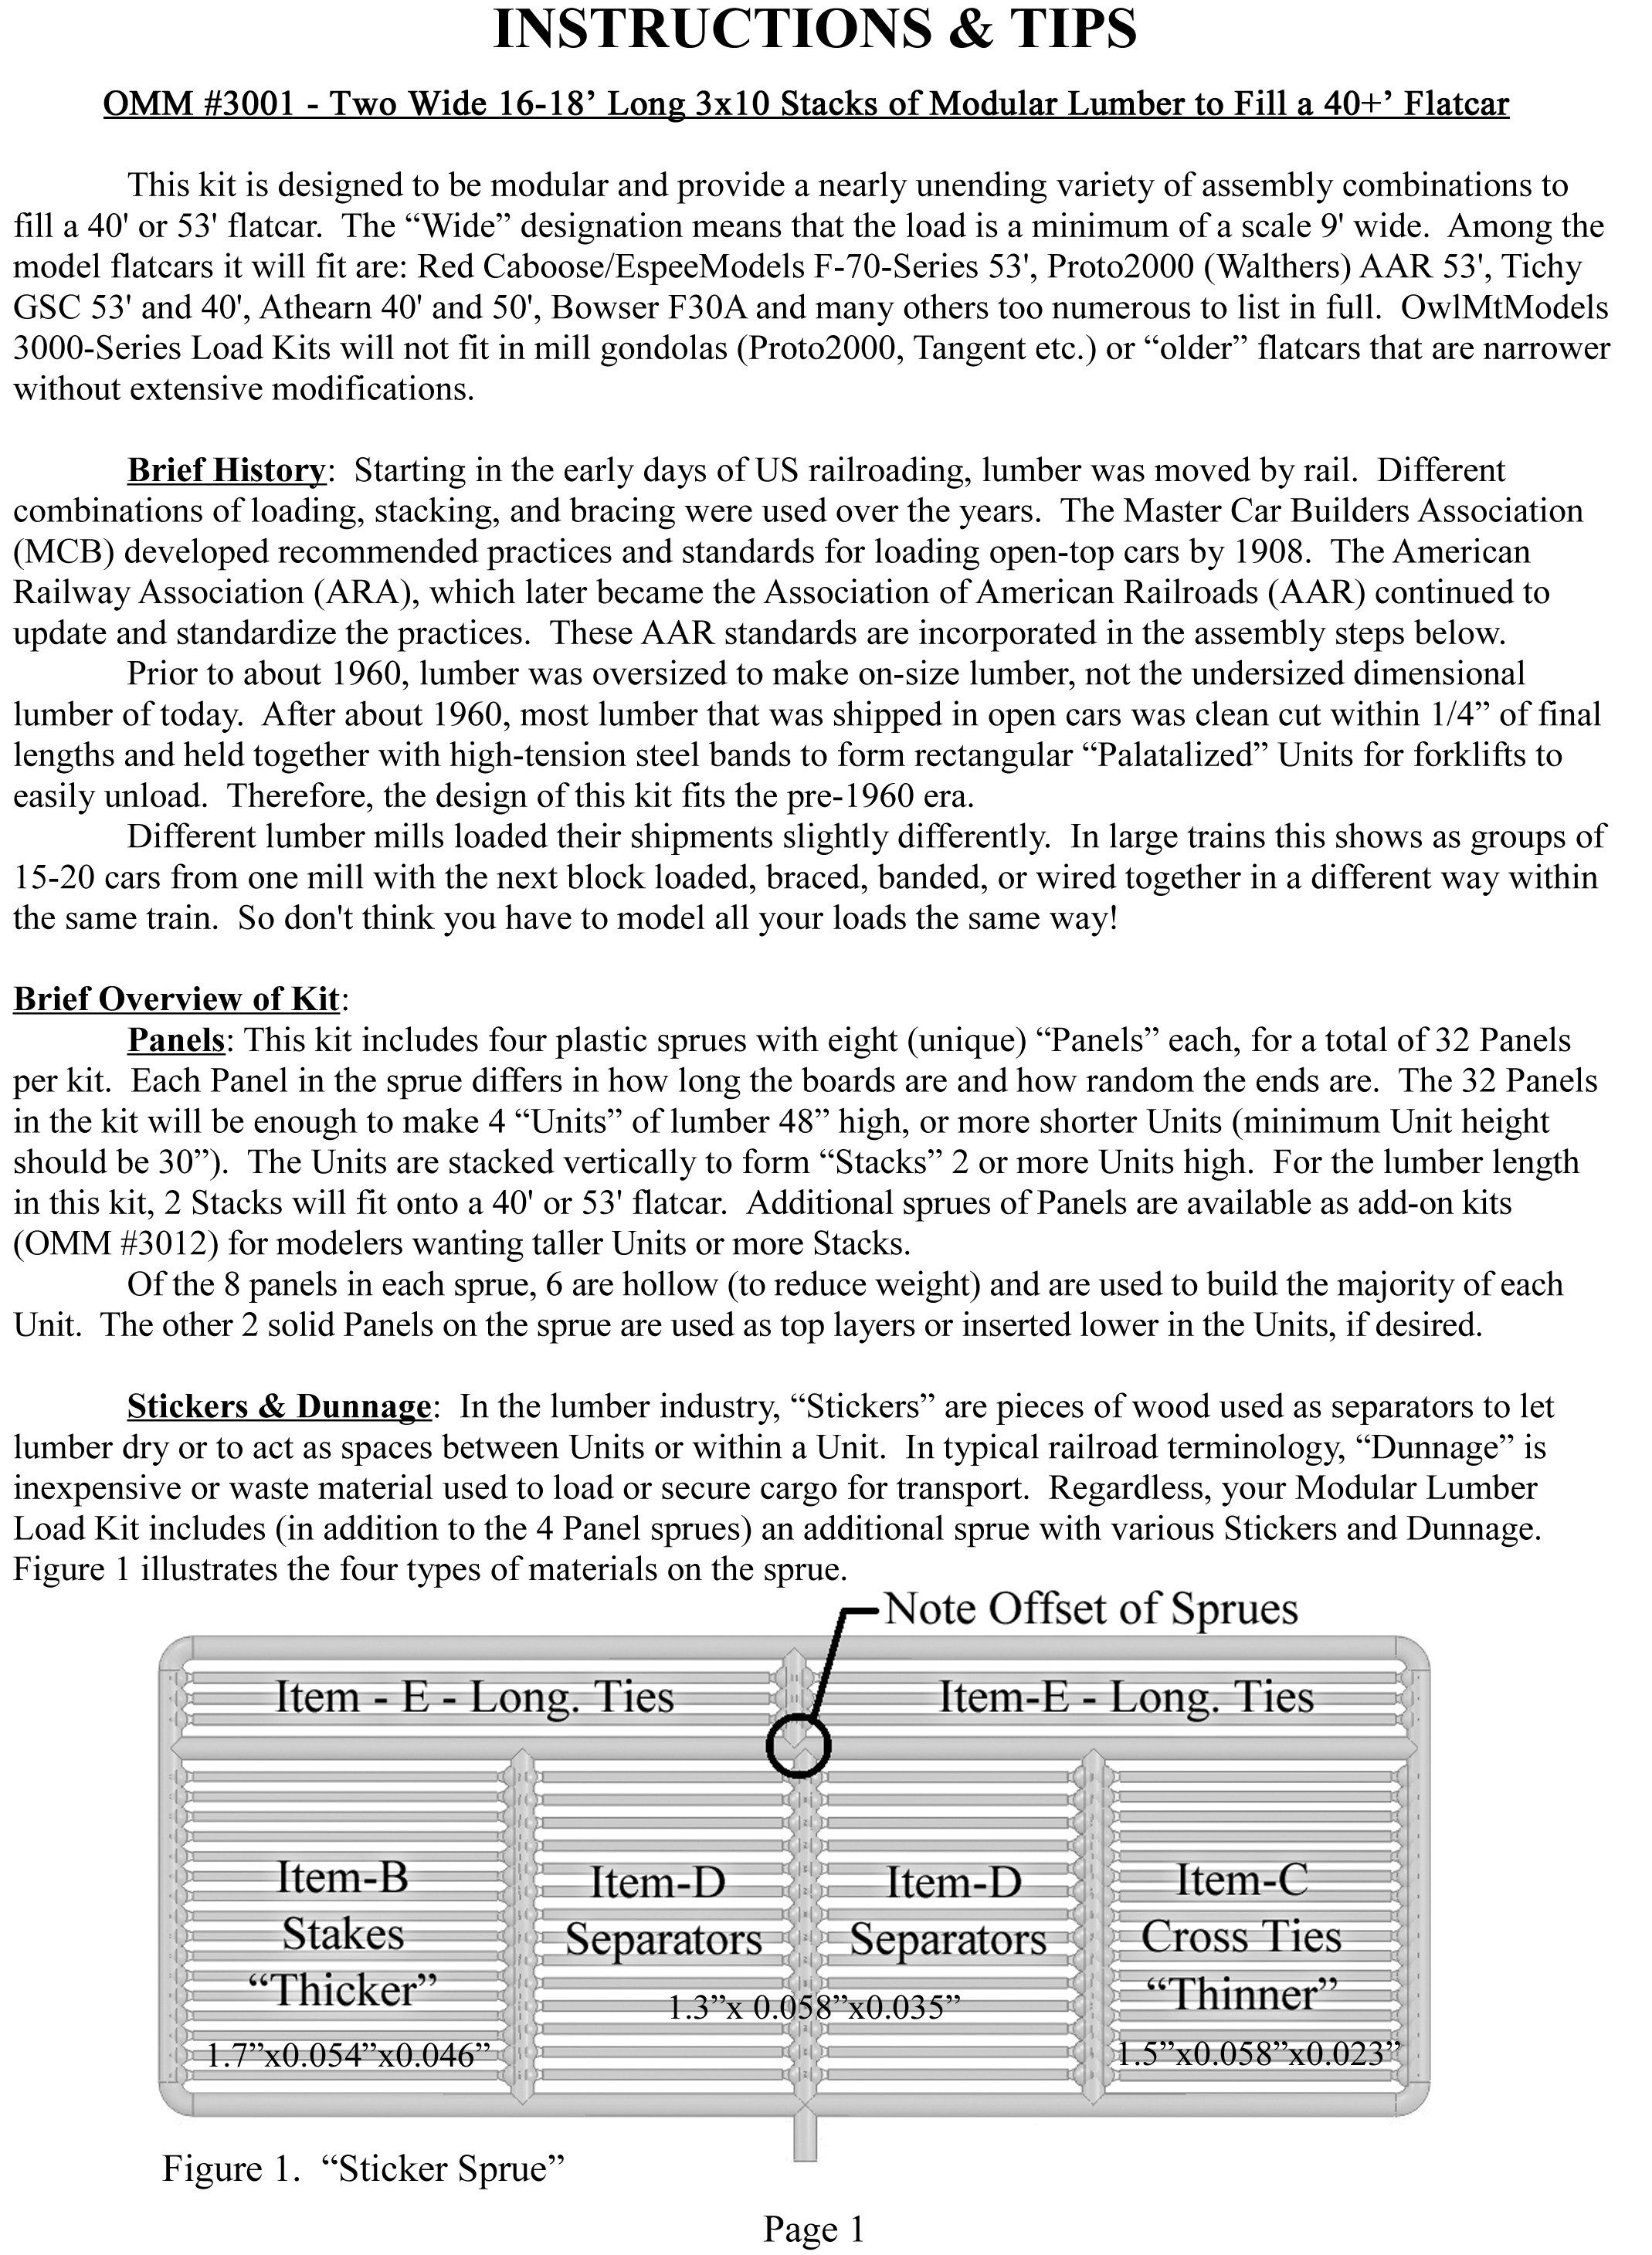 OMM 3001 Instructions Pg1 of 4